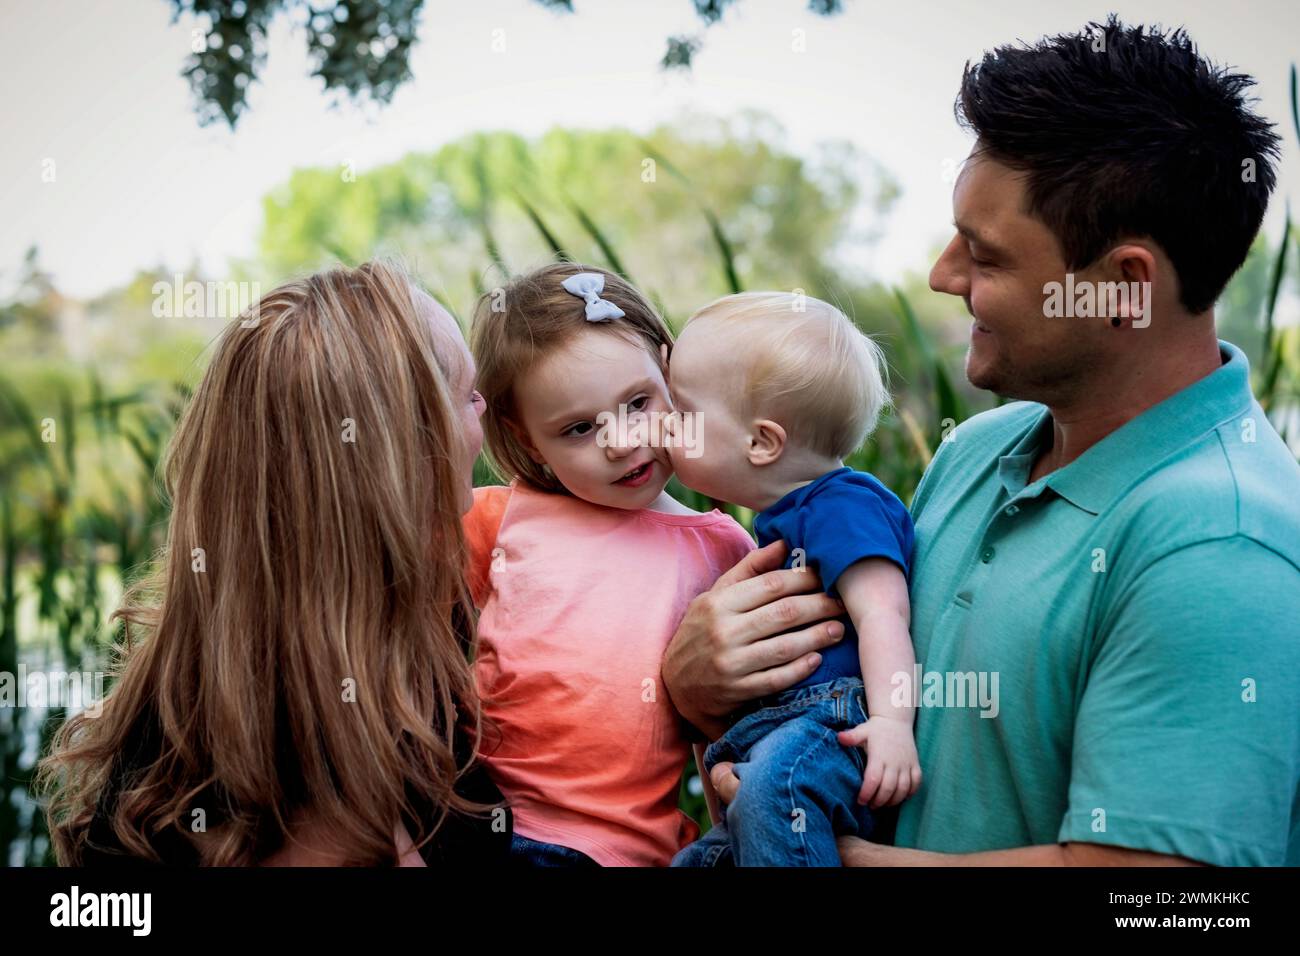 Young boy who has Down syndrome kisses his sister while the mother and father look on; Leduc, Alberta, Canada Stock Photo